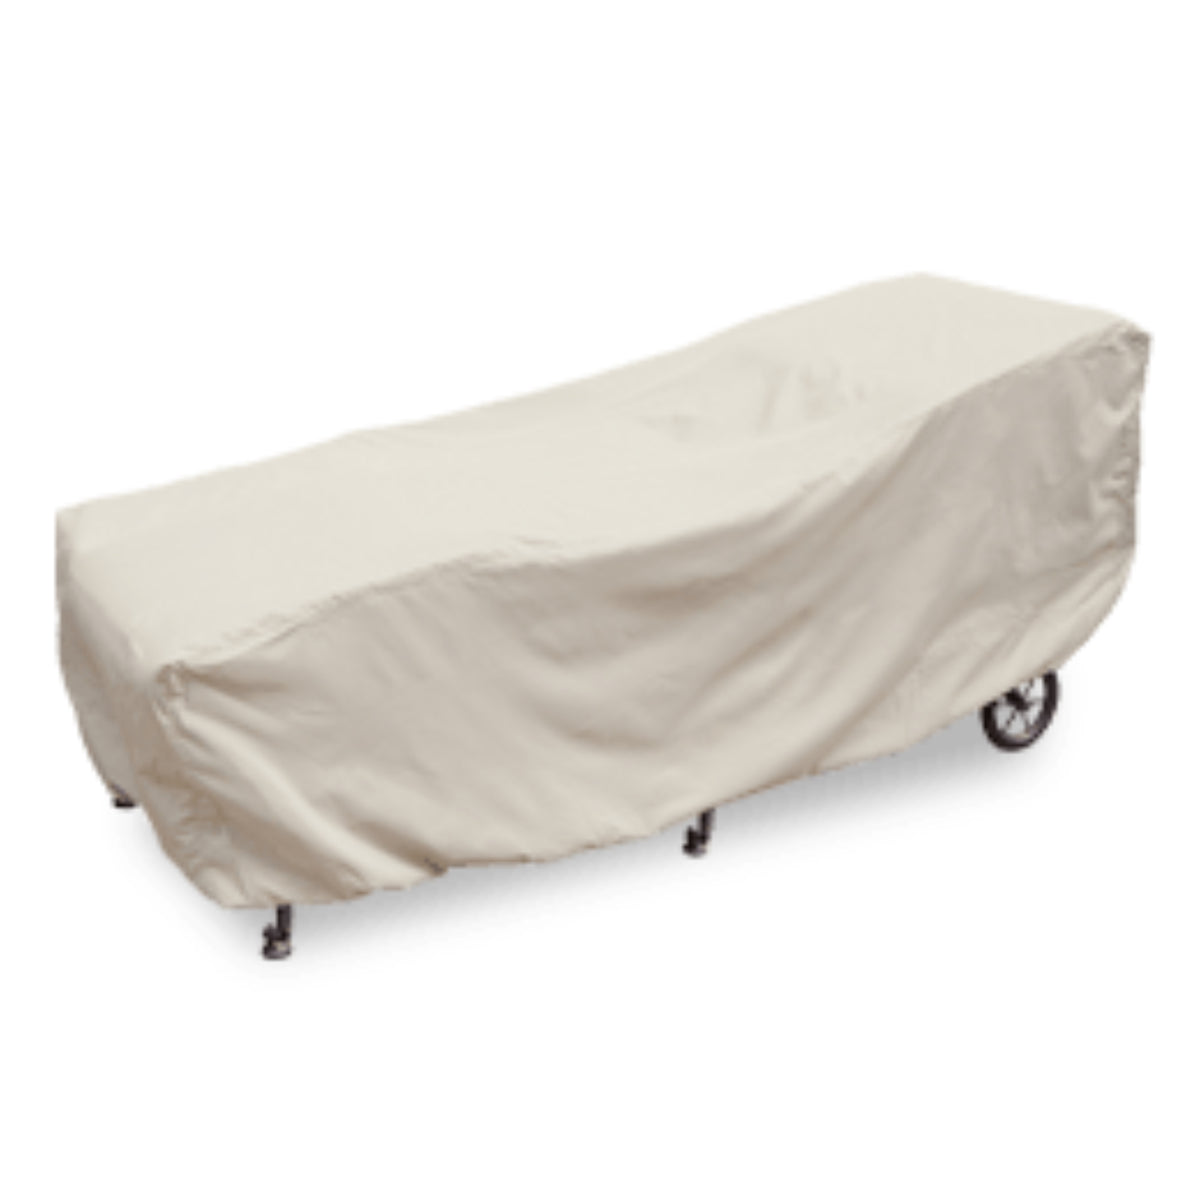 Large Chaise Lounger Cover